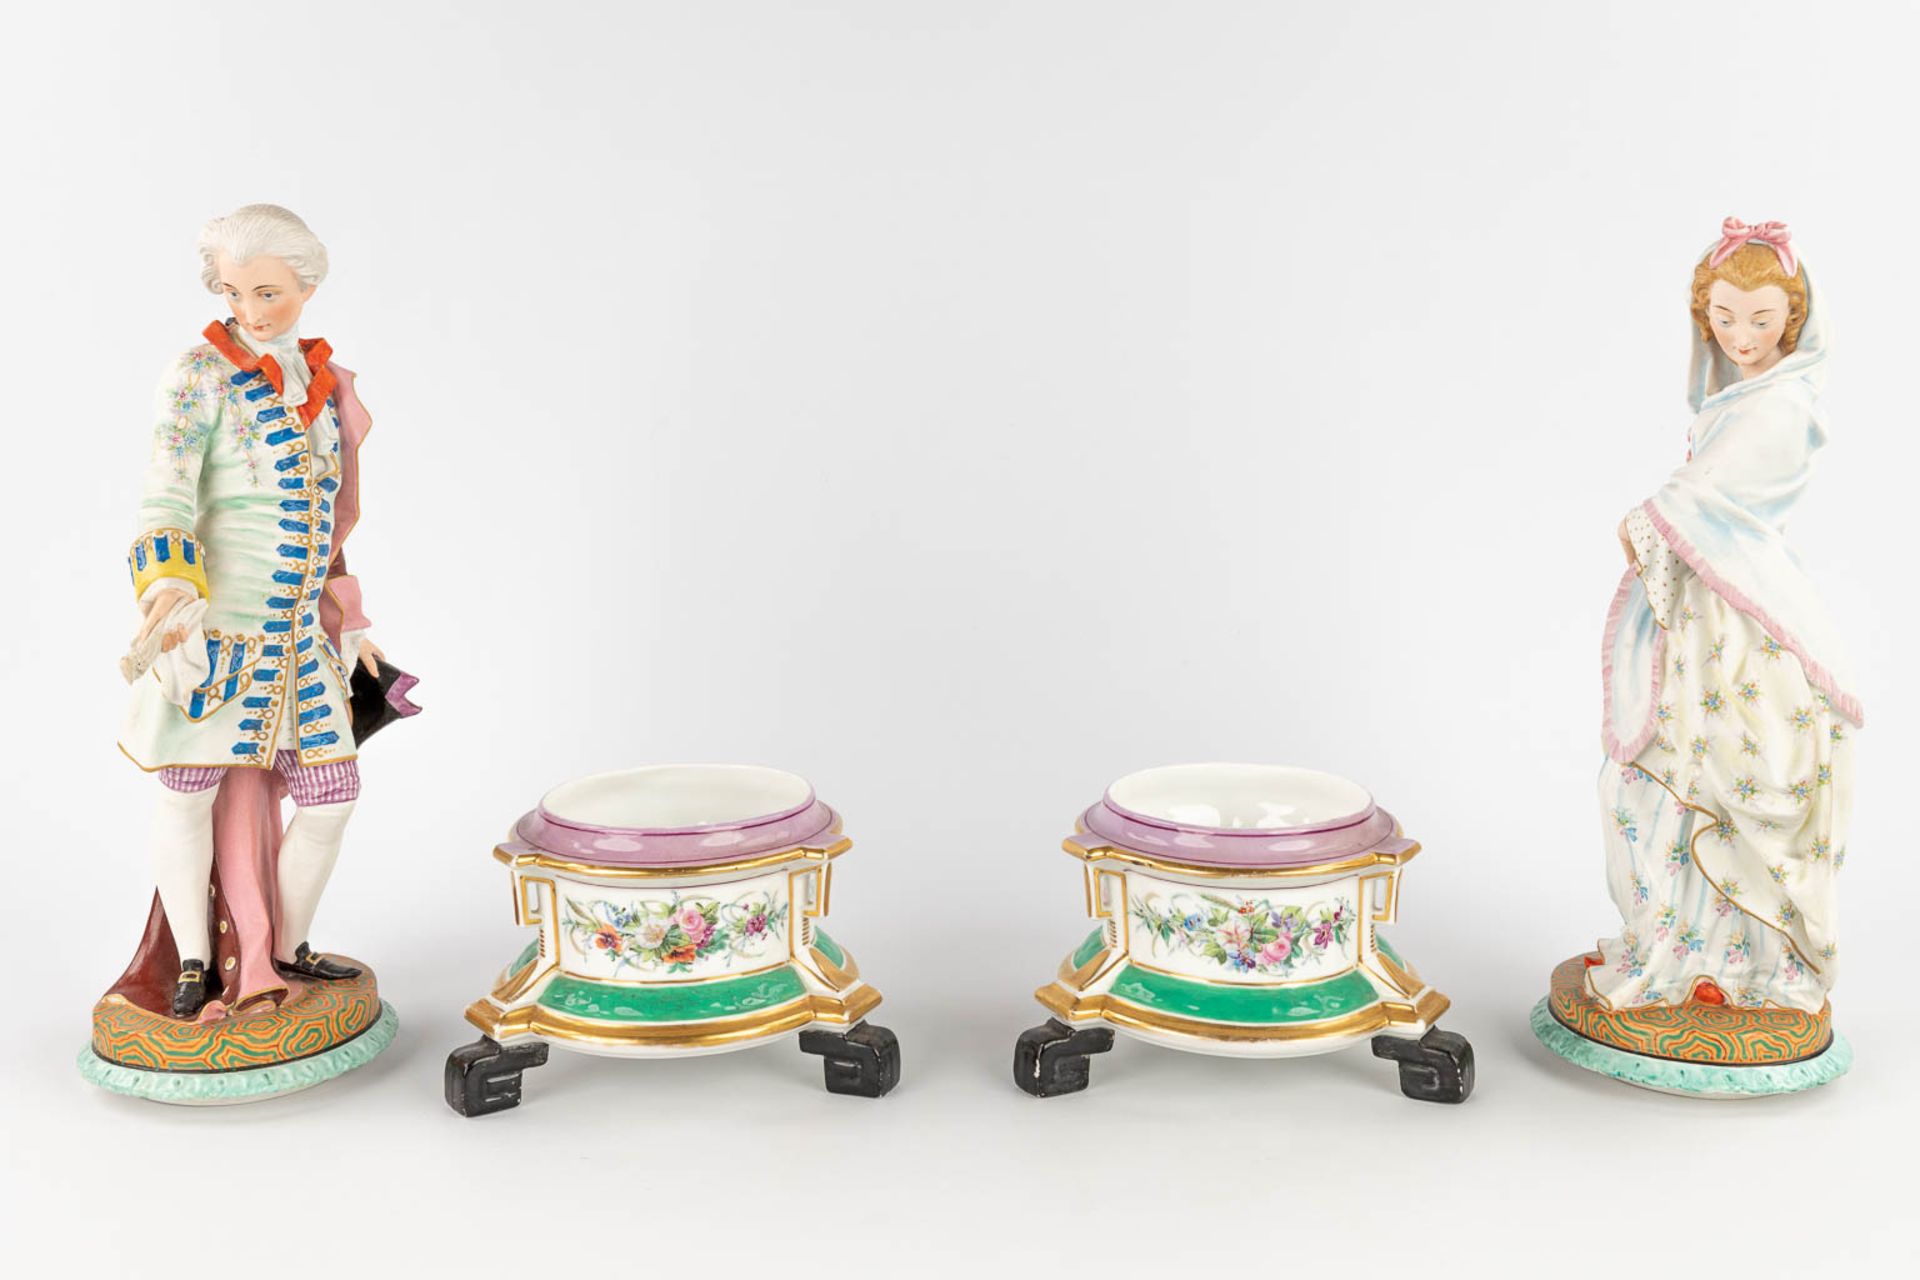 A pair of antique bisque figurines, standing on a glazed porcelain base. (L: 18 x W: 18 x H: 49 cm) - Image 8 of 24